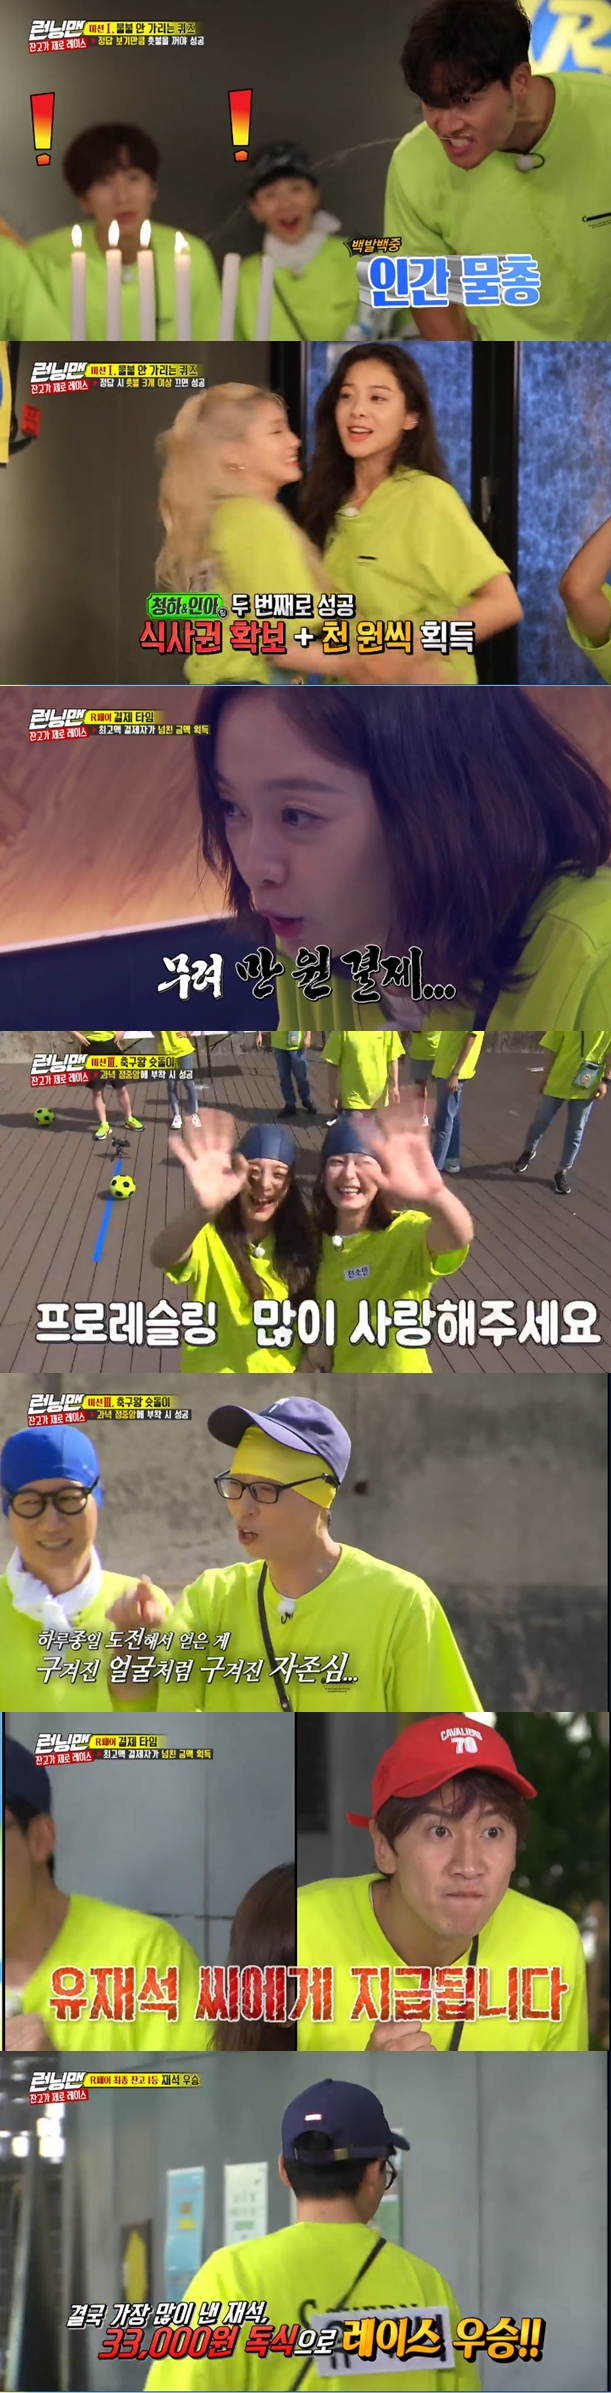 Yoo Jae-Suk and Lee Kwang-soo were fateed by a thousand won difference.In the SBS entertainment program Running Man broadcasted on the afternoon of the 23rd, Seol In-ah and Cheong-ha came out as guests and shared the running project race of the members.The members started a solo race with two guests.The person who paid the most and the person who paid less will be penalized, the crew said this week, explaining the rules of the race, Zero Race.Yoo Jae-Suk laughed after complaining that if you do this, one of me, Ji Suk-jin and Lee Kwang-soo will be punished unconditionally.While moving to the first mission site, the members named each other English language.When Qingha answered that his English language name was Sophie, Kim Jong-kook named Ji Suk-jins English language, saying, I will say that Seokjin is named after Cody Bellinger of LA Dodgers.Lee Kwang-soo then said his English language name was Matthew Perry, and Yoo Jae-Suk said, Matthew Perry?, which made Lee Kwang-soo embarrassed.The first mission was to wait for the members, and the crew was asked to take the water with their mouths as much as they could to answer, and told them that they were successful.The members were all embarrassed, but Kim Jong-kook showed the skill close to the novelty and impressed the members, but the answer he chose was not the right answer.Lee Kwang-soo then followed Kim Jong-kooks technique but failed because he could not aim.Kim Jong-kook and Yang Se-chan, who challenged again, eventually got the right answer and eventually won a meal ticket and 1,000 won.The rest of the team competed fiercely over the ensuing meal rights; Song Ji-hyo, who had reigned as Ace in the fierce competition, was reborn as a god of destruction.I could not remember the correct answer, so I could not keep answering it, and even if I knew the correct answer, I could not get a chance to go to the other teams ruse.In the end, Cheongha, Seol In-a team, Jae-seok and Haha team won the meal ticket, and the final place was decided among Song Ji-hyo and Lee Kwang-soo who finished last.Former Ace, gold-handed Song Ji-hyo also lost the match against Lee Kwang-soo, making it the final last in the first round.After the meal ended, the first payment time began to be noticed, and those who ate began to think that those who did not eat would not pay for it.However, the members continued to struggle because the person who paid the most money could take all the money if the money exceeded the money set by the production team.The members bragged that they would pay a lot of money before the payment, but in fact, they paid 2,000 won, which is mostly safe.Song Ji-hyo, who has to pay all the remaining amount if he is last in the game and lacks the amount, decided not to pay after the trouble.However, the amount of money collected by 10 people was 29,000 won, which exceeded the production teams set of 25,000 won. The most paid member was Jeon So-min, who paid 10,000 won.She received an excess of 4,000 won in the first round, but she saw a deficit.The food waiting for the members at the second mission site was beef steamed; four tickets were given, and the members started a notch game to win the meal ticket.After a fierce sense of game, Cheongha, Kim Jong-kook, Yoo Jae-Suk and Lee Kwang-soo won the meal ticket.In addition, the first-place winner pointed to Yang Se-chan as the last, and Yang Se-chan had to pay for the shortage when money was insufficient.After eating beef steamed rice, the members started to notice again.The production team presented 19,000 won to the members, and the members had members who risked the money differently from the first round.After the fight, the amount of money collected by 10 members was 29,000 won, and Song Ji-hyo and Seol In-ah, who paid 10,000 won, shared 5,000 won each to see the deficit.Eventually, only Lee Kwang-soo and Haha, who did not pay, benefited.The third ceremony was a recreational ceremony, which all the members expected. The final place where the members arrived was football and shoot mission.After a fierce competition, Yoo Jae-Suk passed the commission with first place.He gave Song Ji-hyo and Jeon So-min the meal ticket, and the last payment to Ji Suk-jin; the last payment amount was 27,000 won.The members were even at the end of the fight, and Lee Kwang-soo, who thought it was meaningless if he was not in first place, did All In.The final sum was sixty thousand won. Lee Kwang-soo listened to the amount and expected to receive 33,000 won over.However, Yoo Jae-Suk thought the same thing, and the main character of the excess amount was the part of Yoo Jae-Suk, which had more than 1,000 won.Lee Kwang-soo went bankrupt in the aftermath of All In, and he was penalized for water bombs with Seol In-ah, who had the least amount, and Ji Suk-jin, whom she identified.